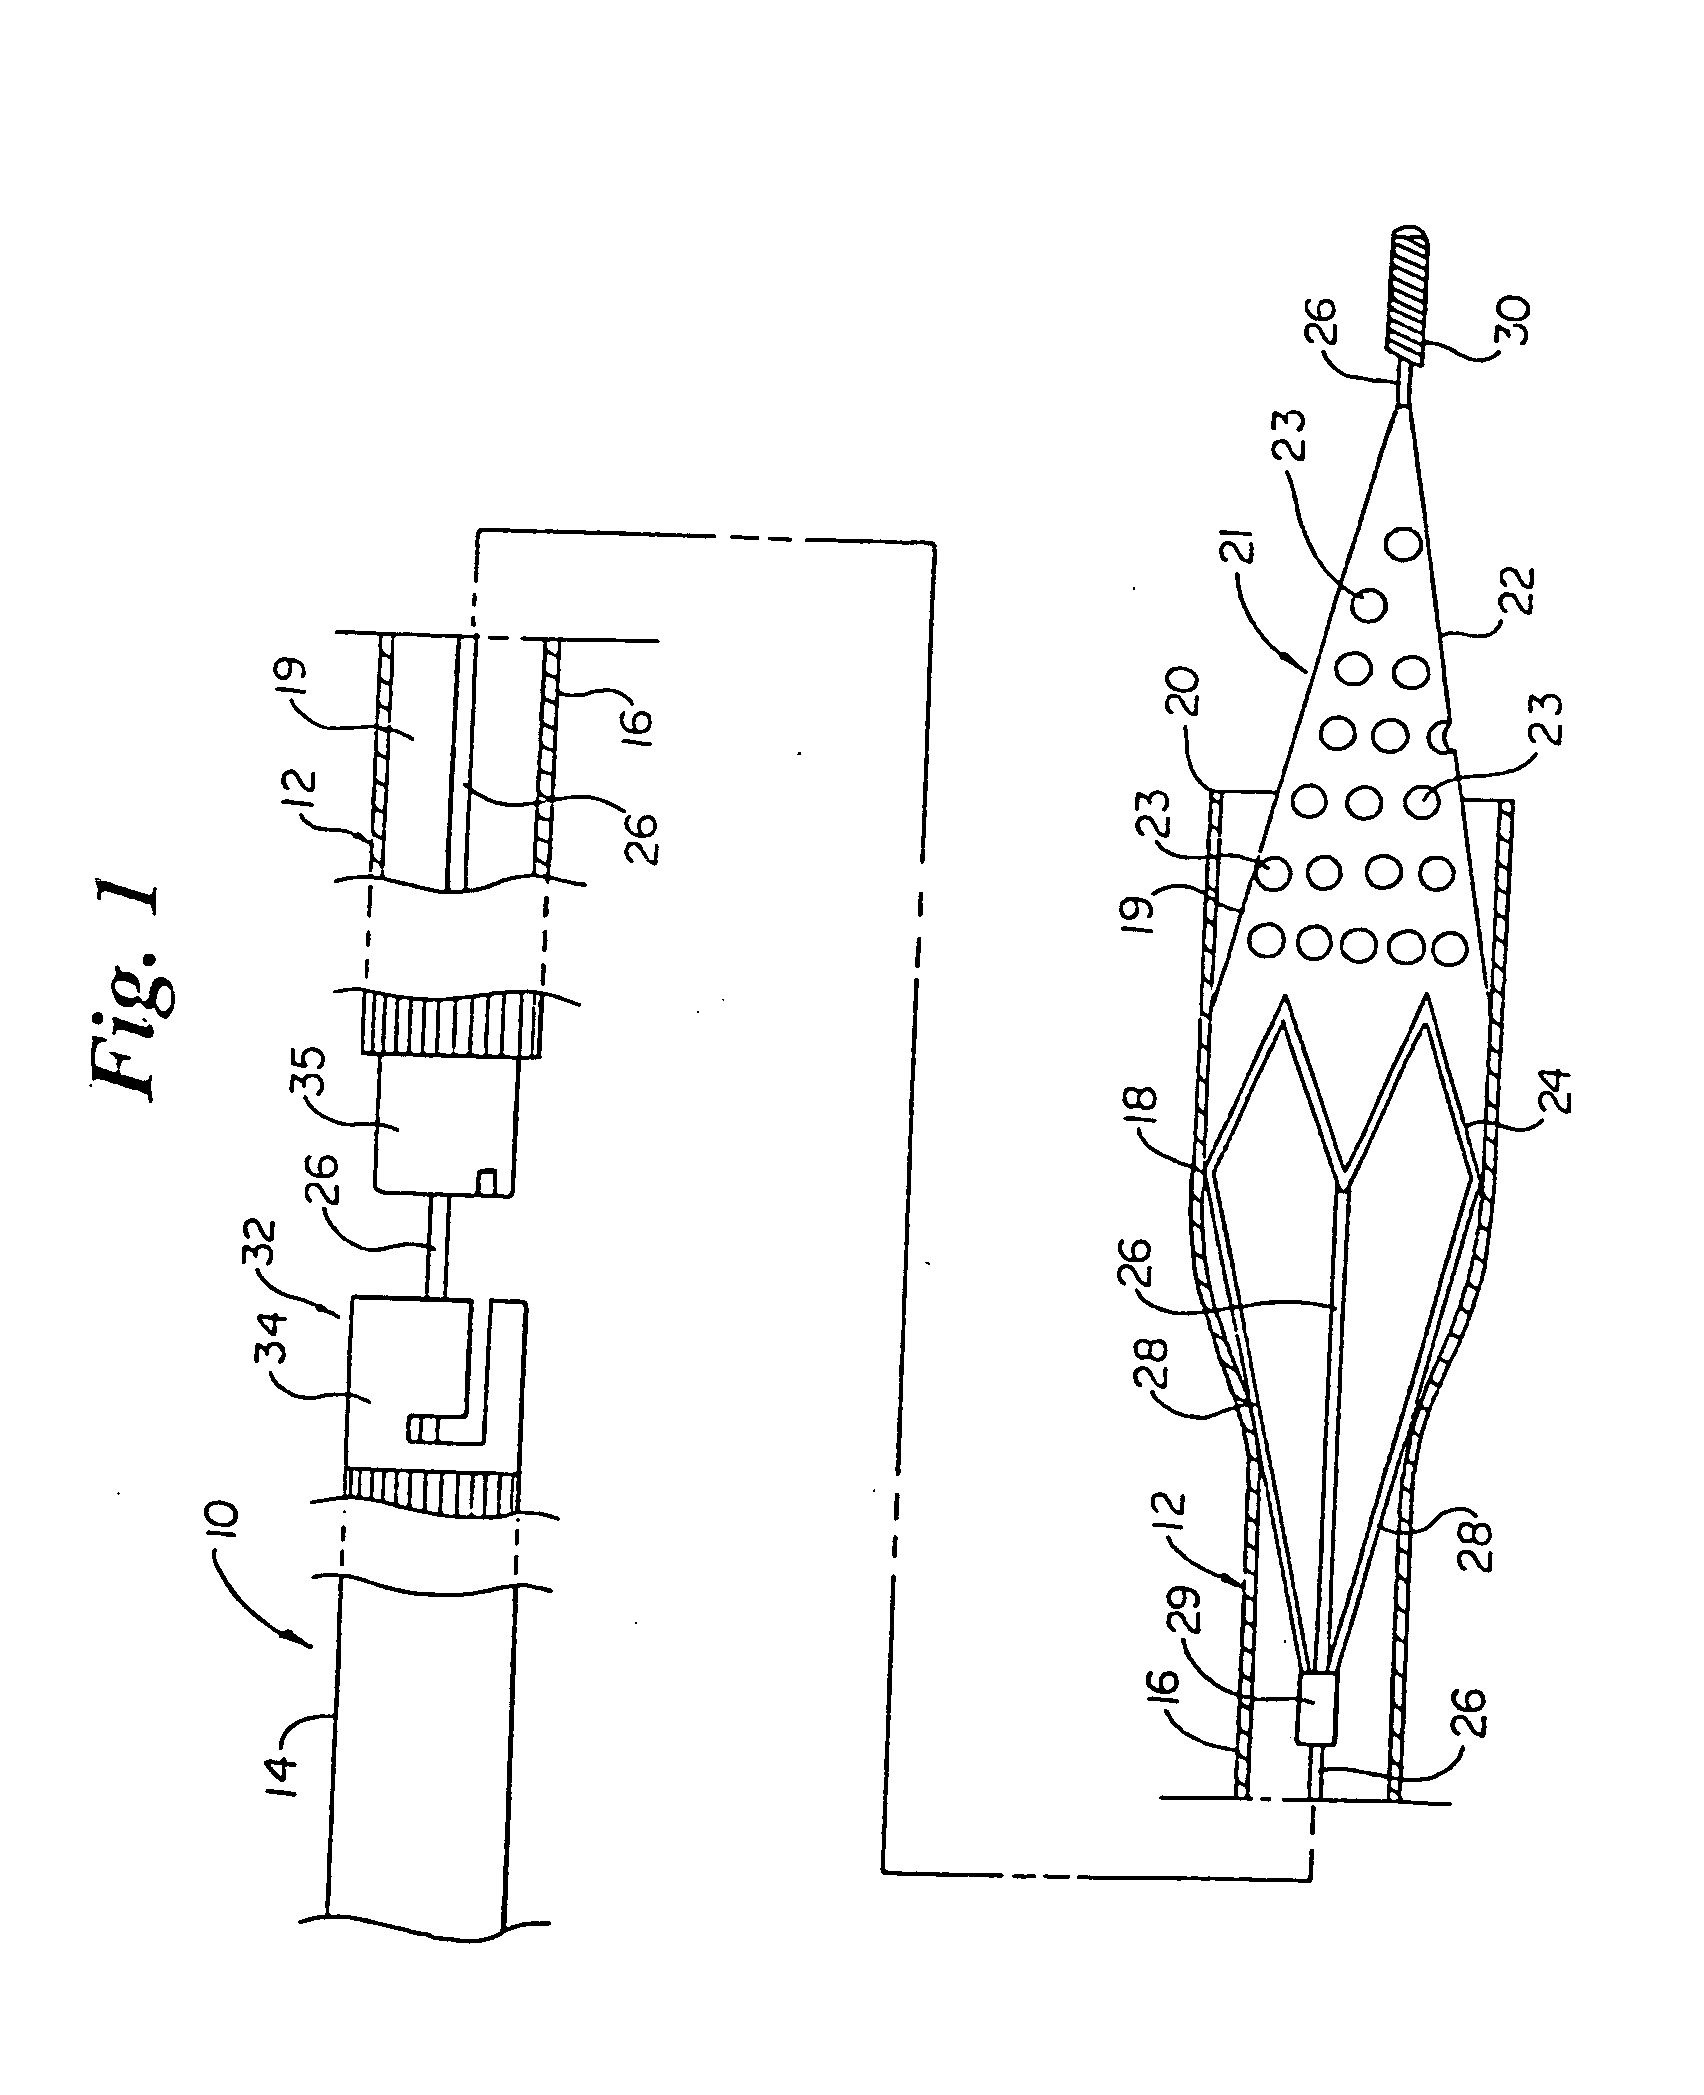 Intravascular filter and method